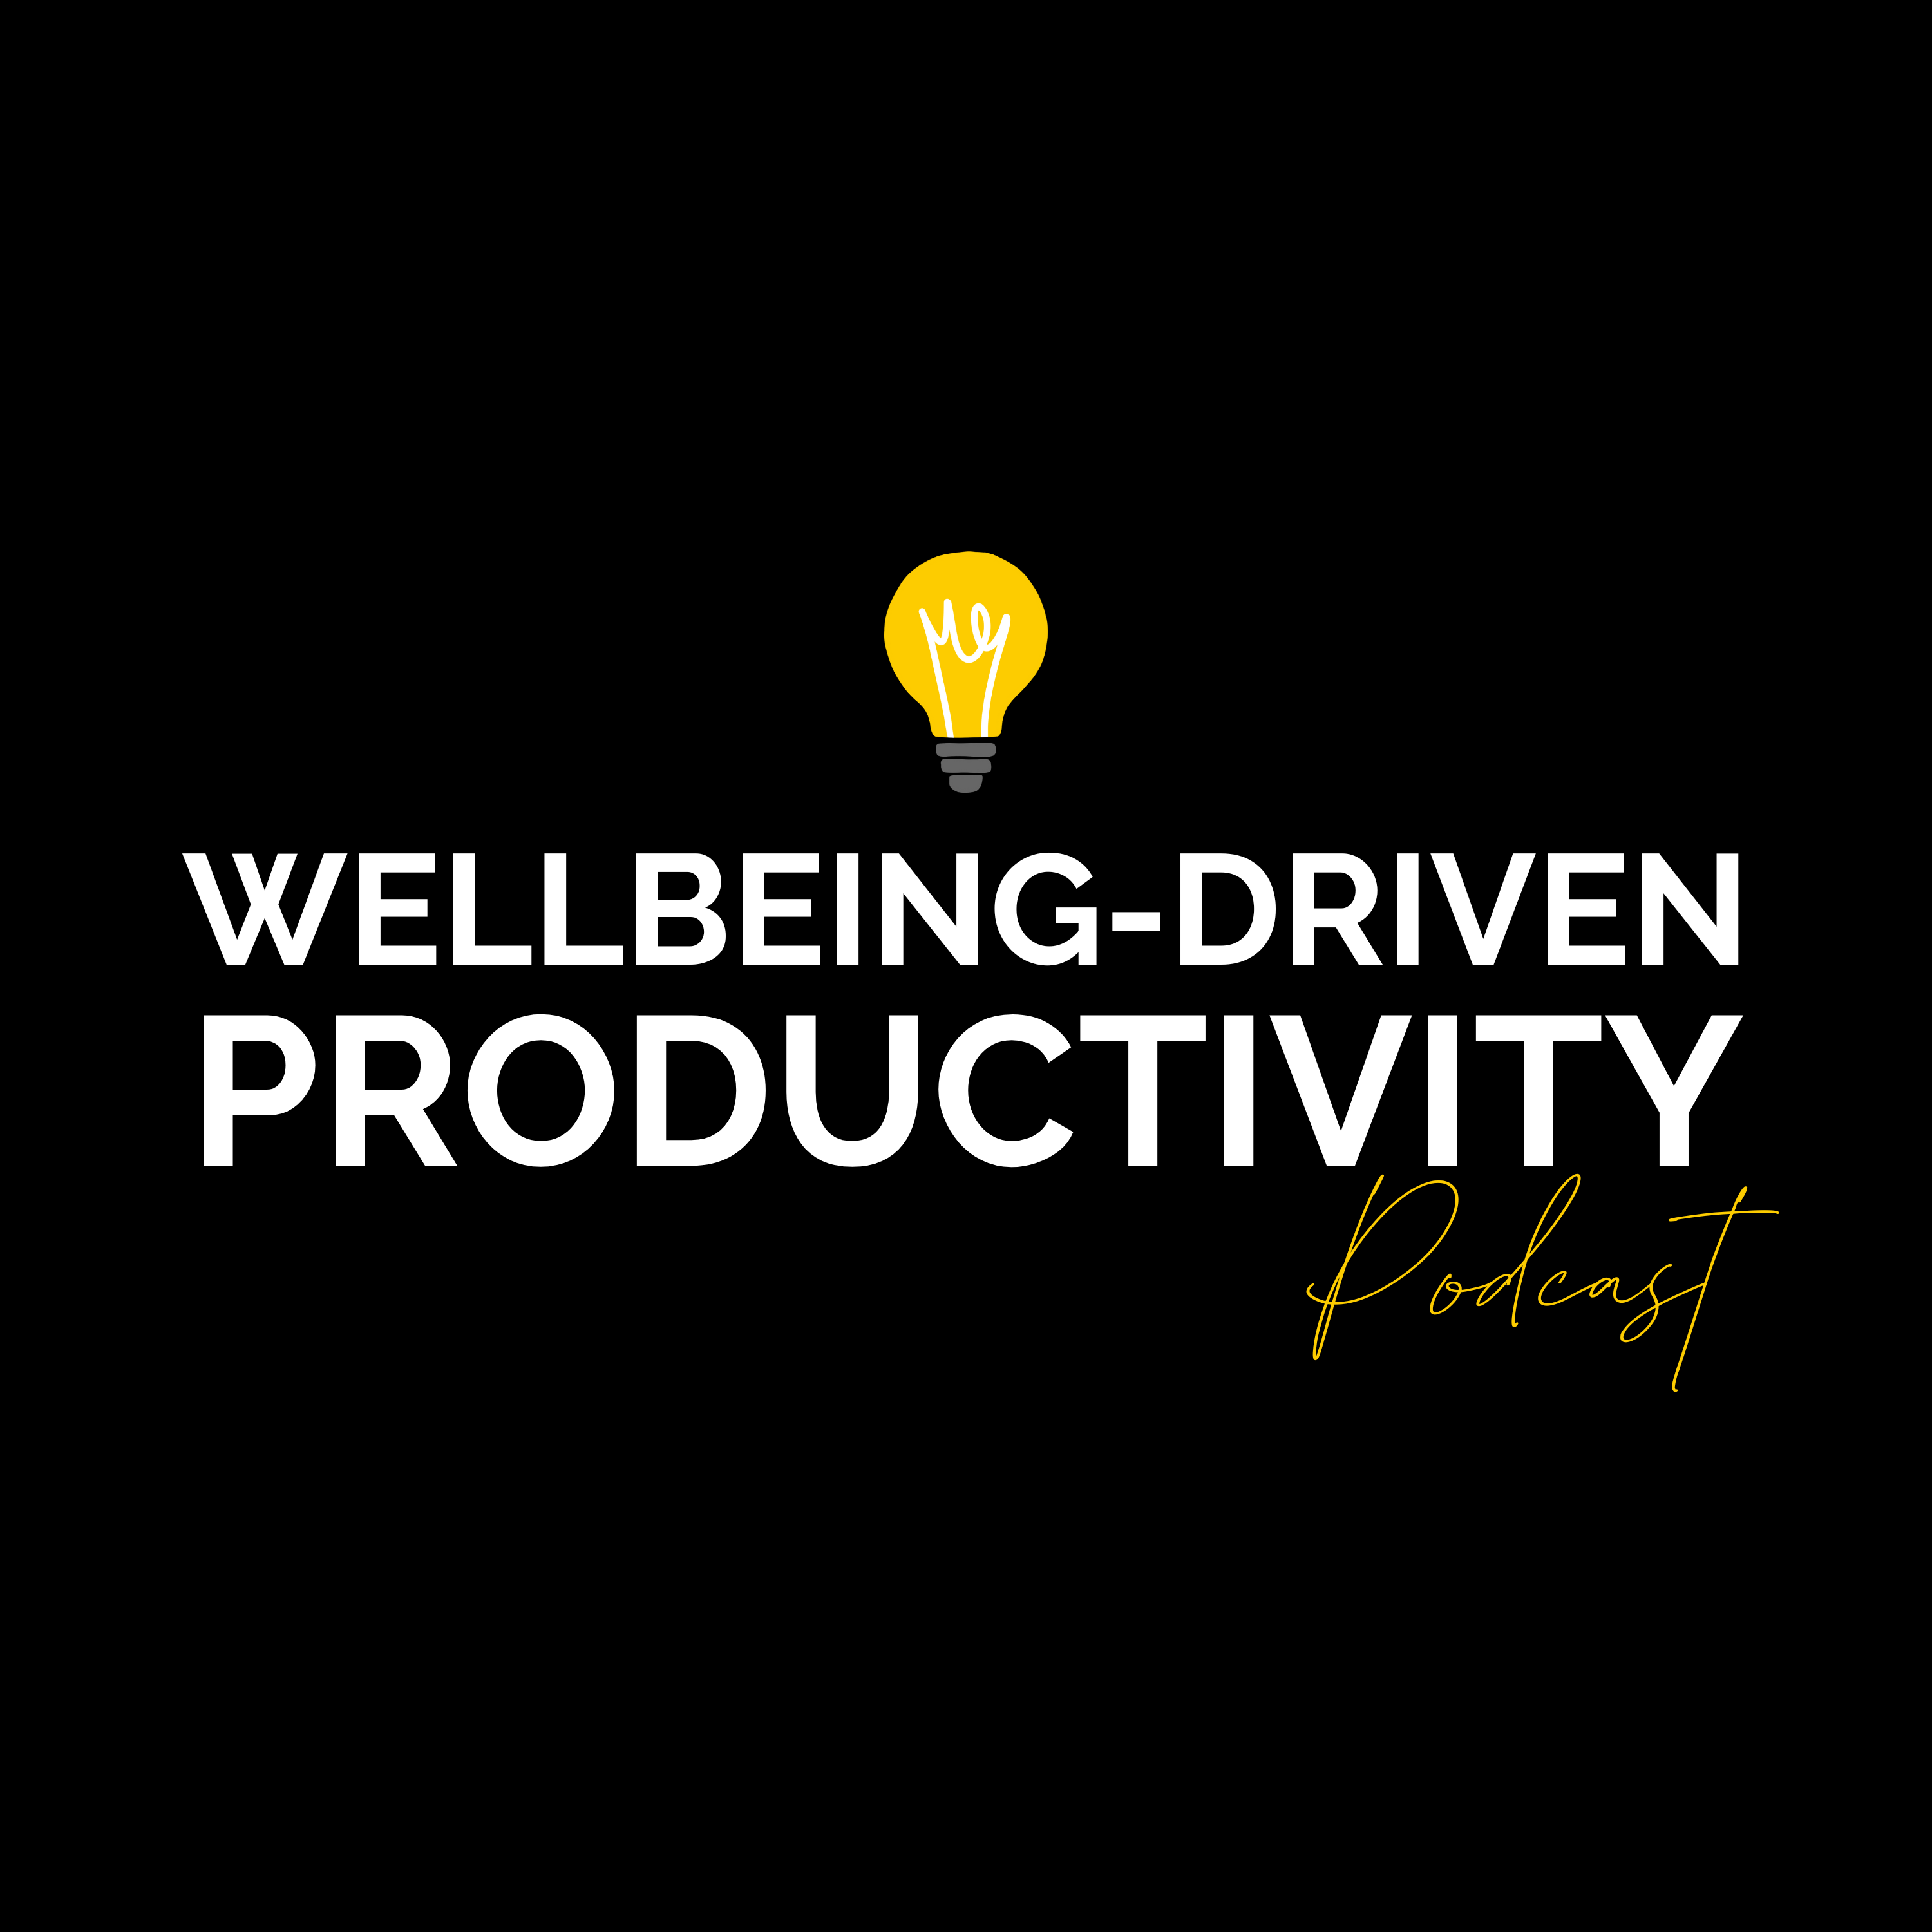 The Role of Self-Awareness and Resilience in Wellbeing-Driven Productivity with David Tedaldi